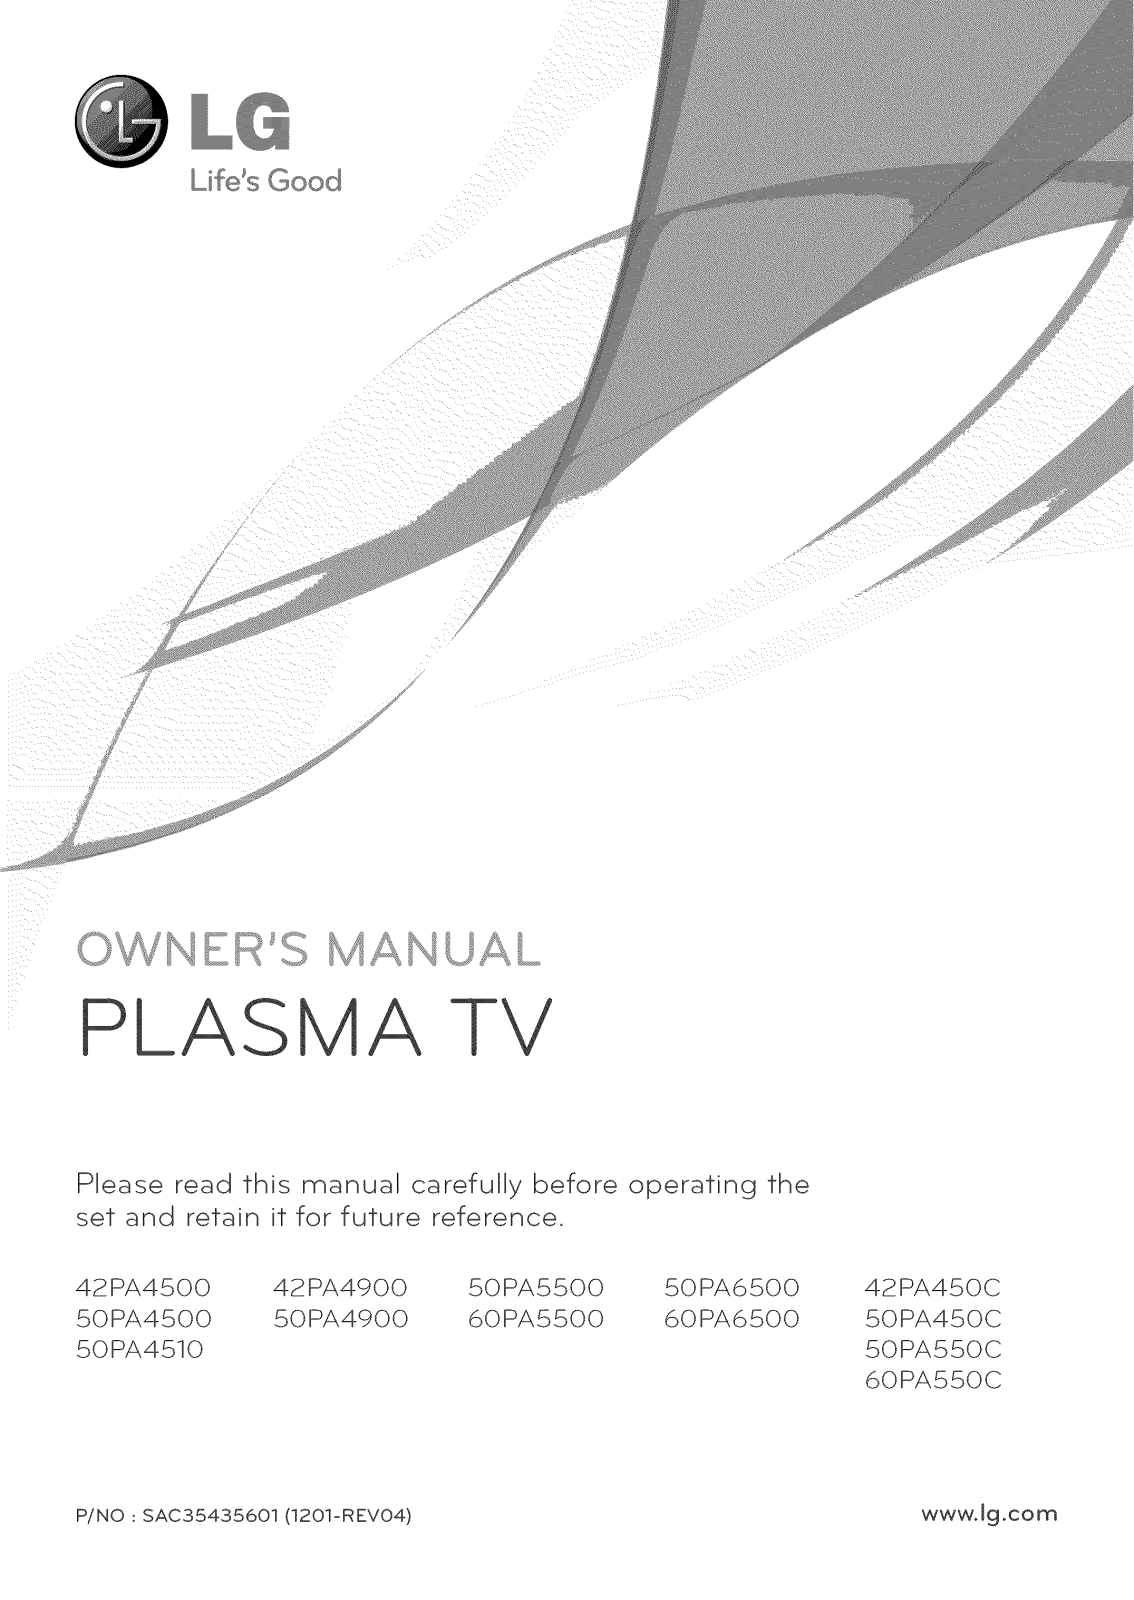 LG 42PA4500-UFAUSLLJR, 42PA4500-UFAUSLLHR Owner’s Manual